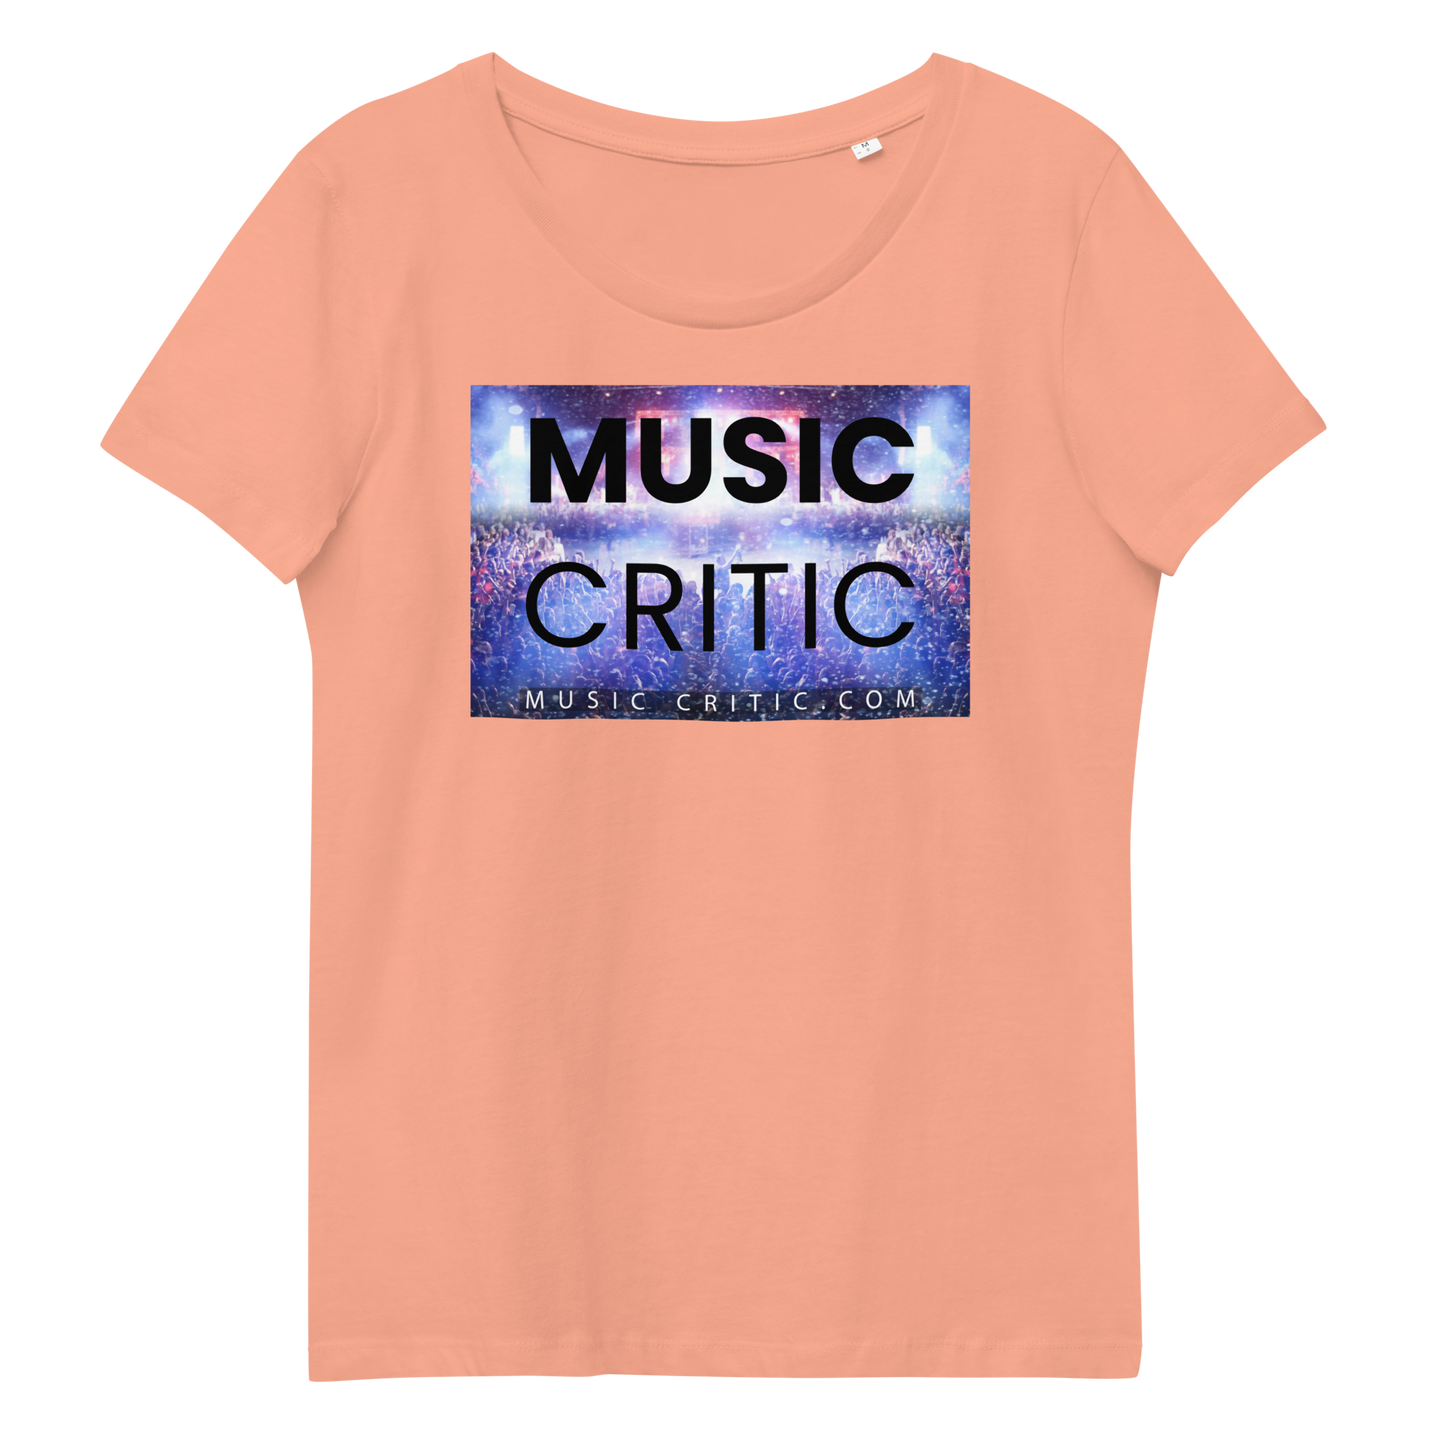 Women's Music Critic fitted eco tee